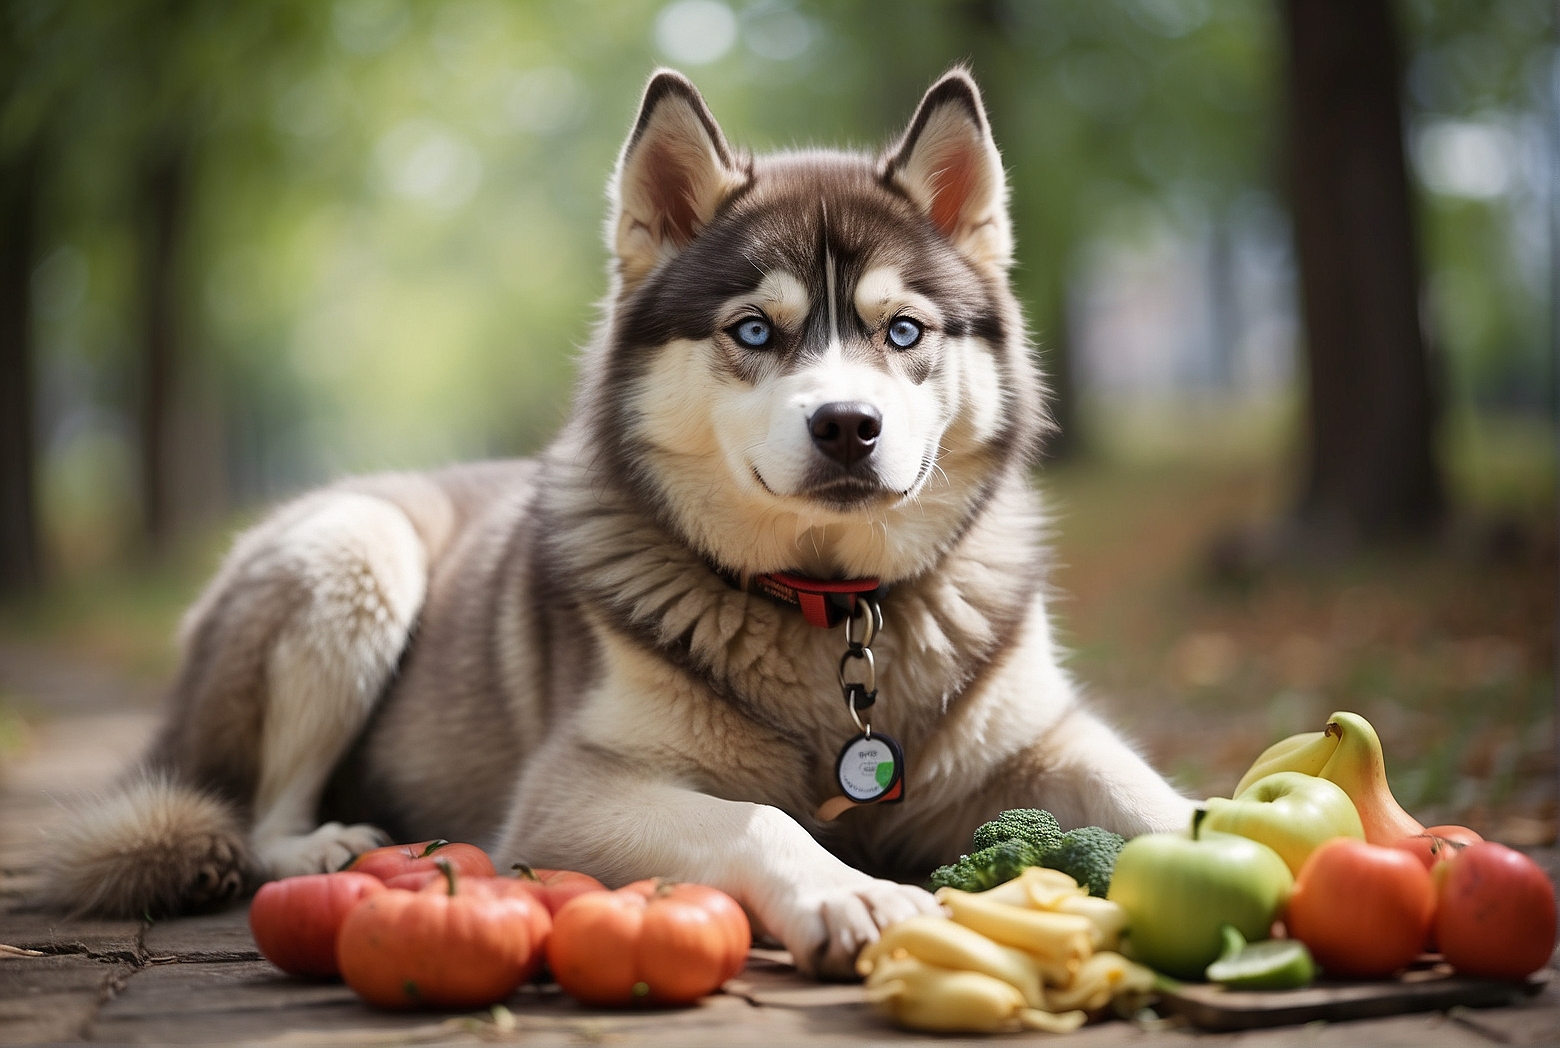 Dietary Recommendations for a Siberian Husky